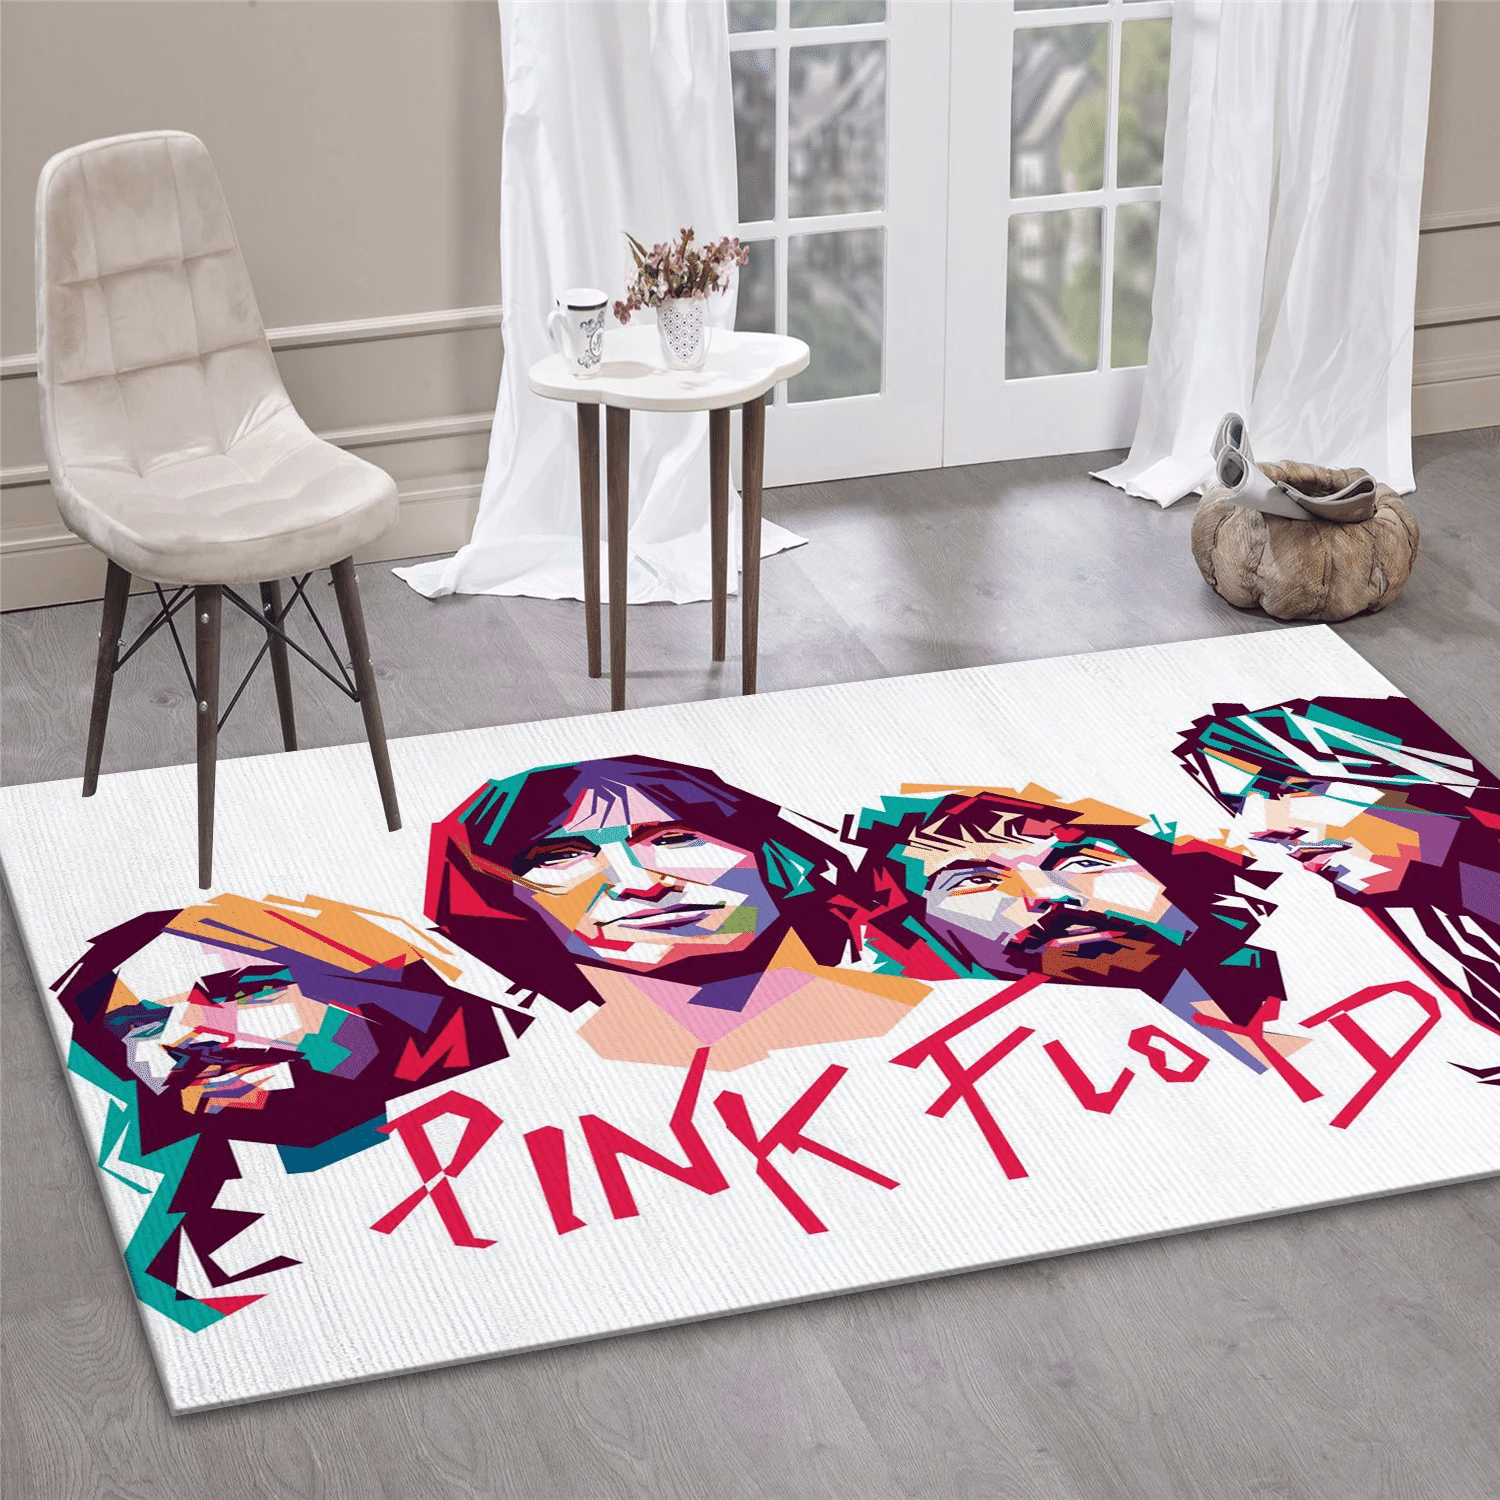 Pink Floyd Fulcolor Music Area Rug For Christmas, Living Room Rug - Floor Decor - Indoor Outdoor Rugs 1